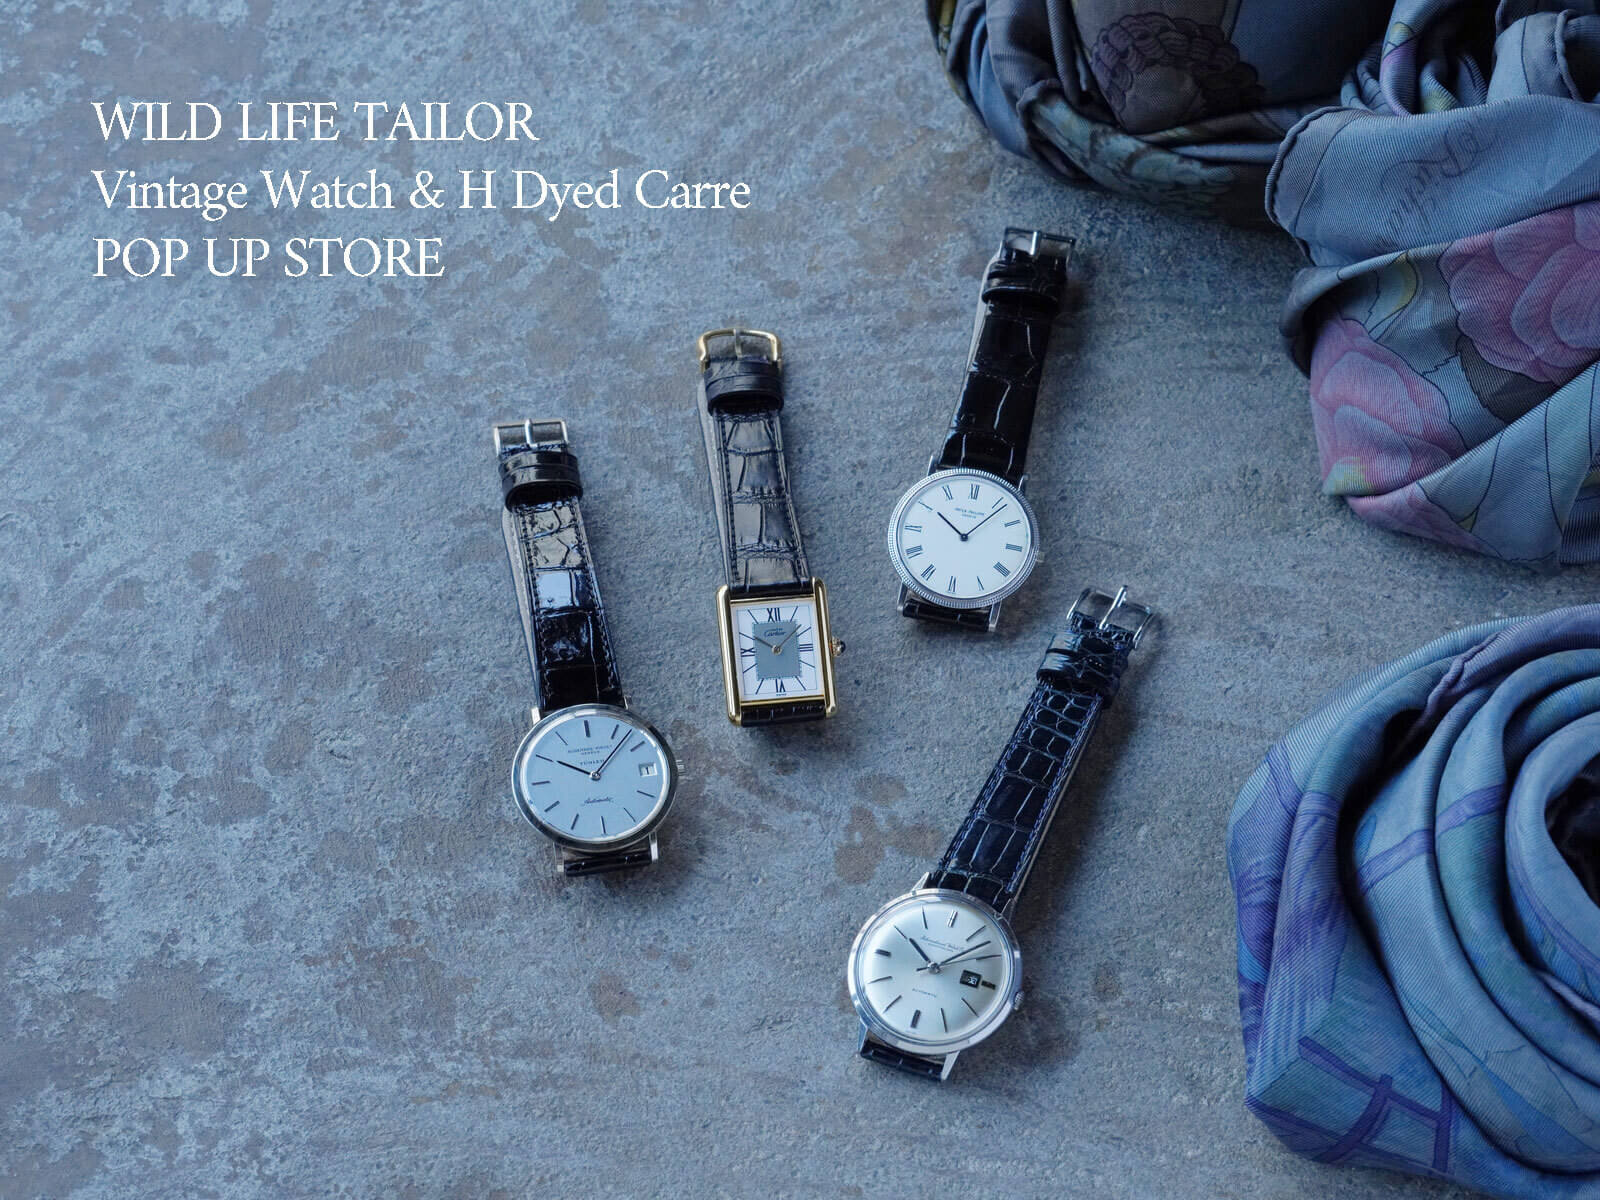 WILD LIFE TAILOR / Vintage Watch & H Dyed Carre / EBISU 2023/6/2-4 SAPPORO 2023/6/16-25